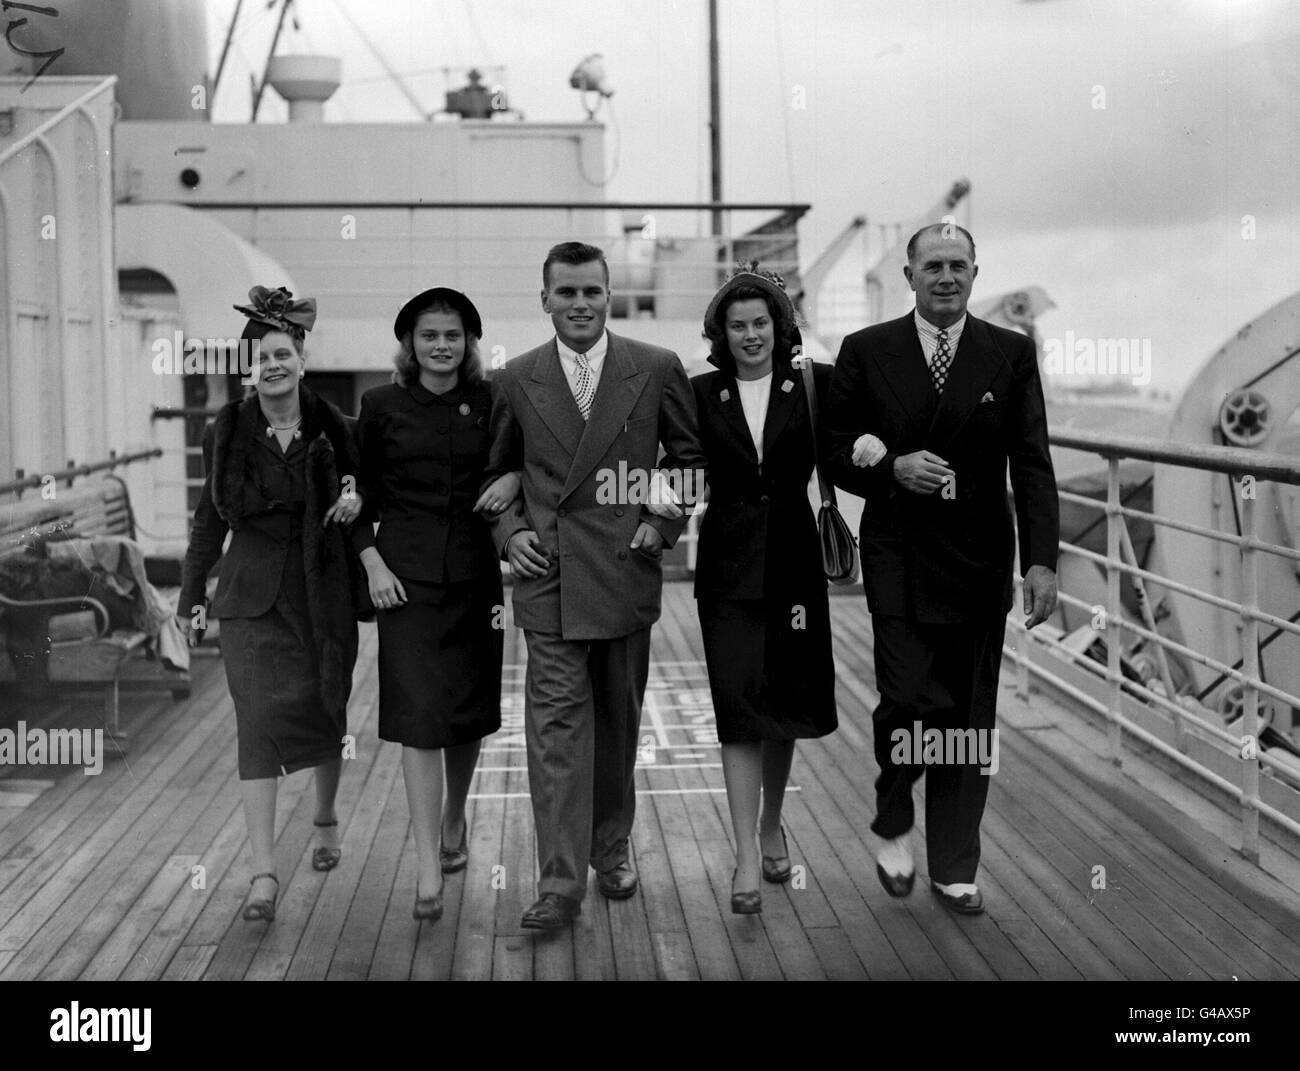 PA NEWS PHOTO 28/6/47 THE UNITED STATES SCULLING CHAMPION JOHN B. KELLY JUNIOR WITH HIS FAMILY ON SOUTHAMPTON PIER (FROM LEFT TO RIGHT) MRS. J. KELLY, MISS ELIZABETH KELLY, JOHN B. KELLY JUNIOR, MISS GRACE KELLY (BEFORE SHE BECAME A FAMOUS ACTRESS) AND MR. JOHN KELLY SENIOR Stock Photo